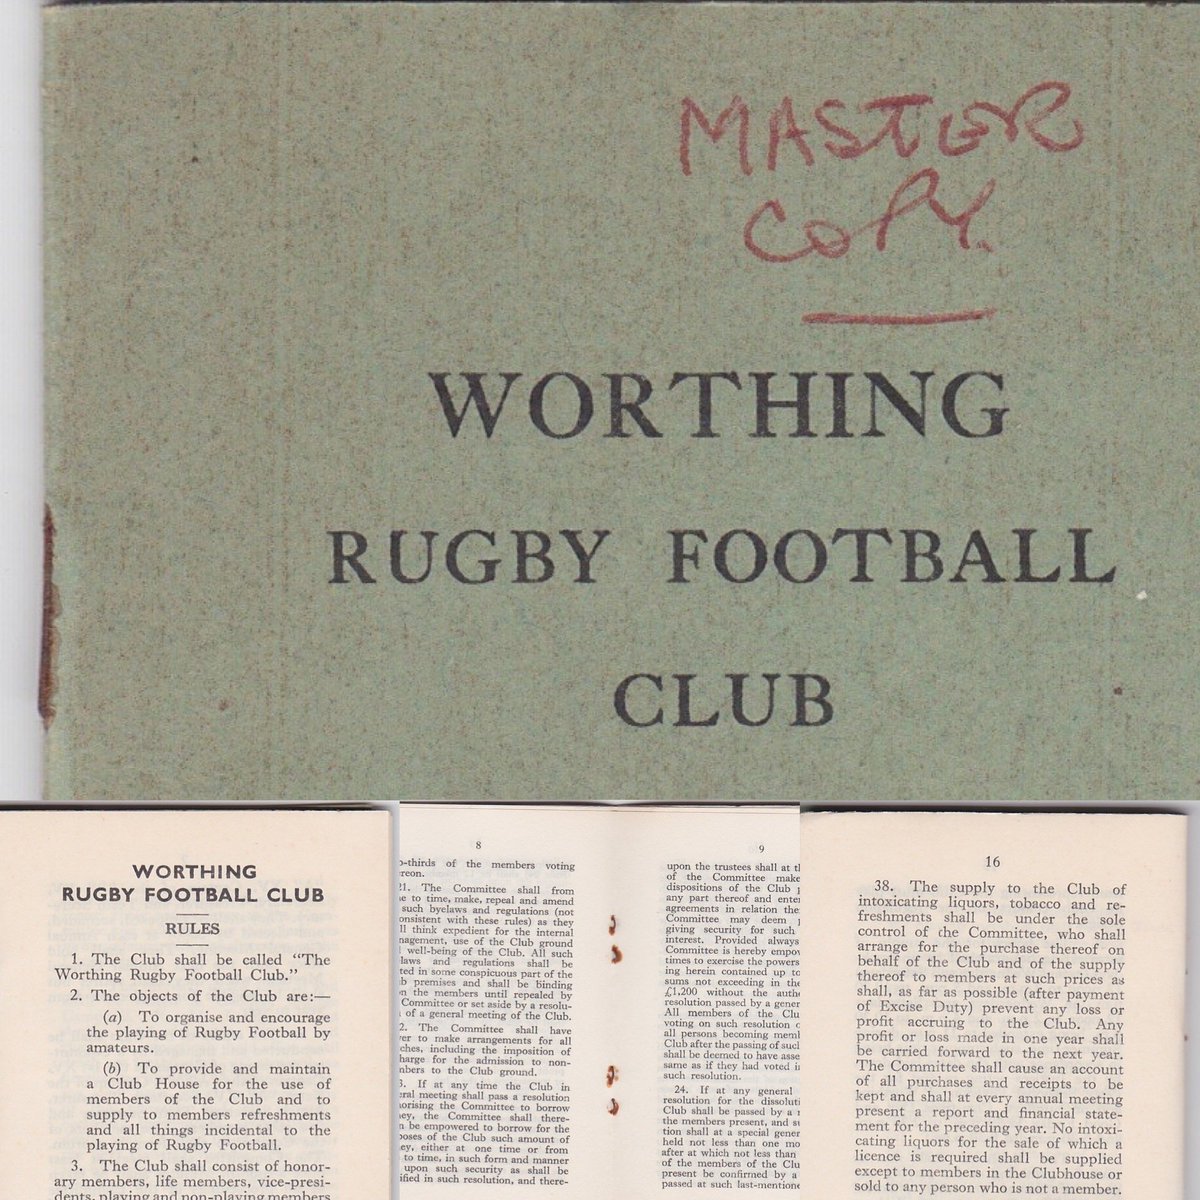 Today’s look back through the @worthingrfc archives takes us back to 1934

Full size copies and many more pages here - facebook.com/WorthingRFCcen…

#WRFC100 #centenaryyear #worthing #100years #oneclub #rugbyforall